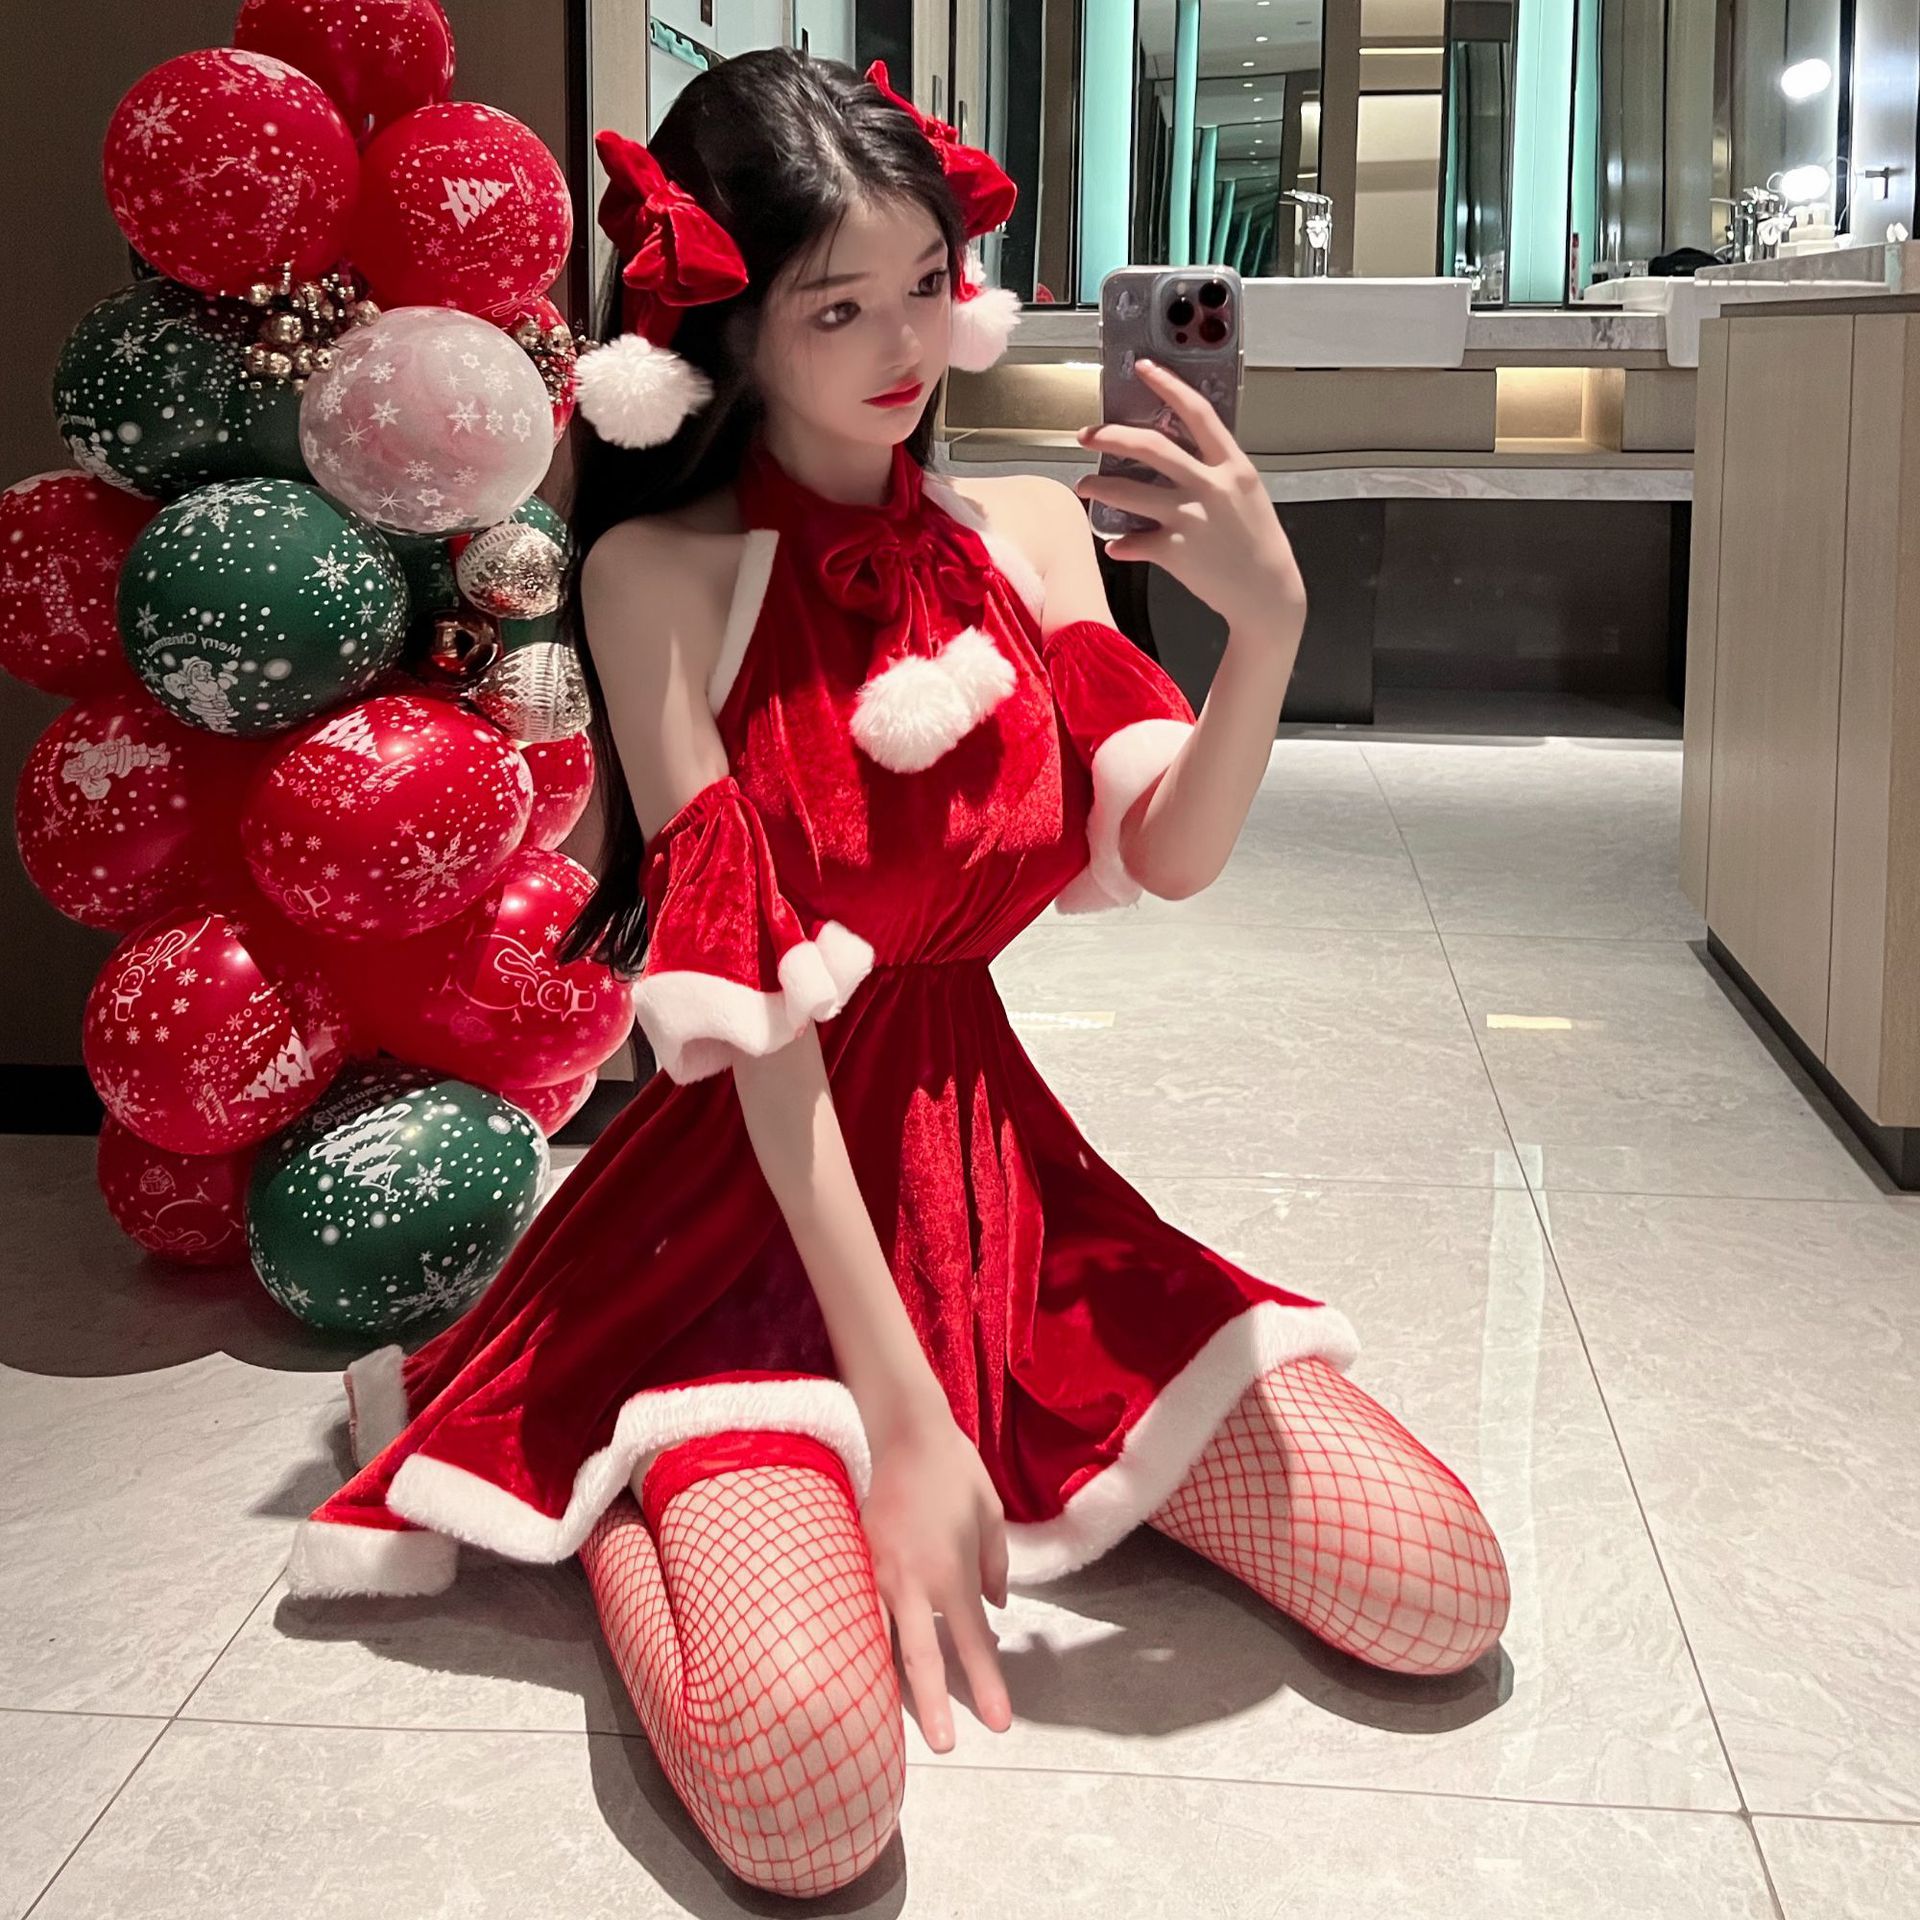 Adult Supplies New Autumn and Winter Women's Dress Sexy Christmas Hot Girl Uniform Passion Backless Sexy Lingerie